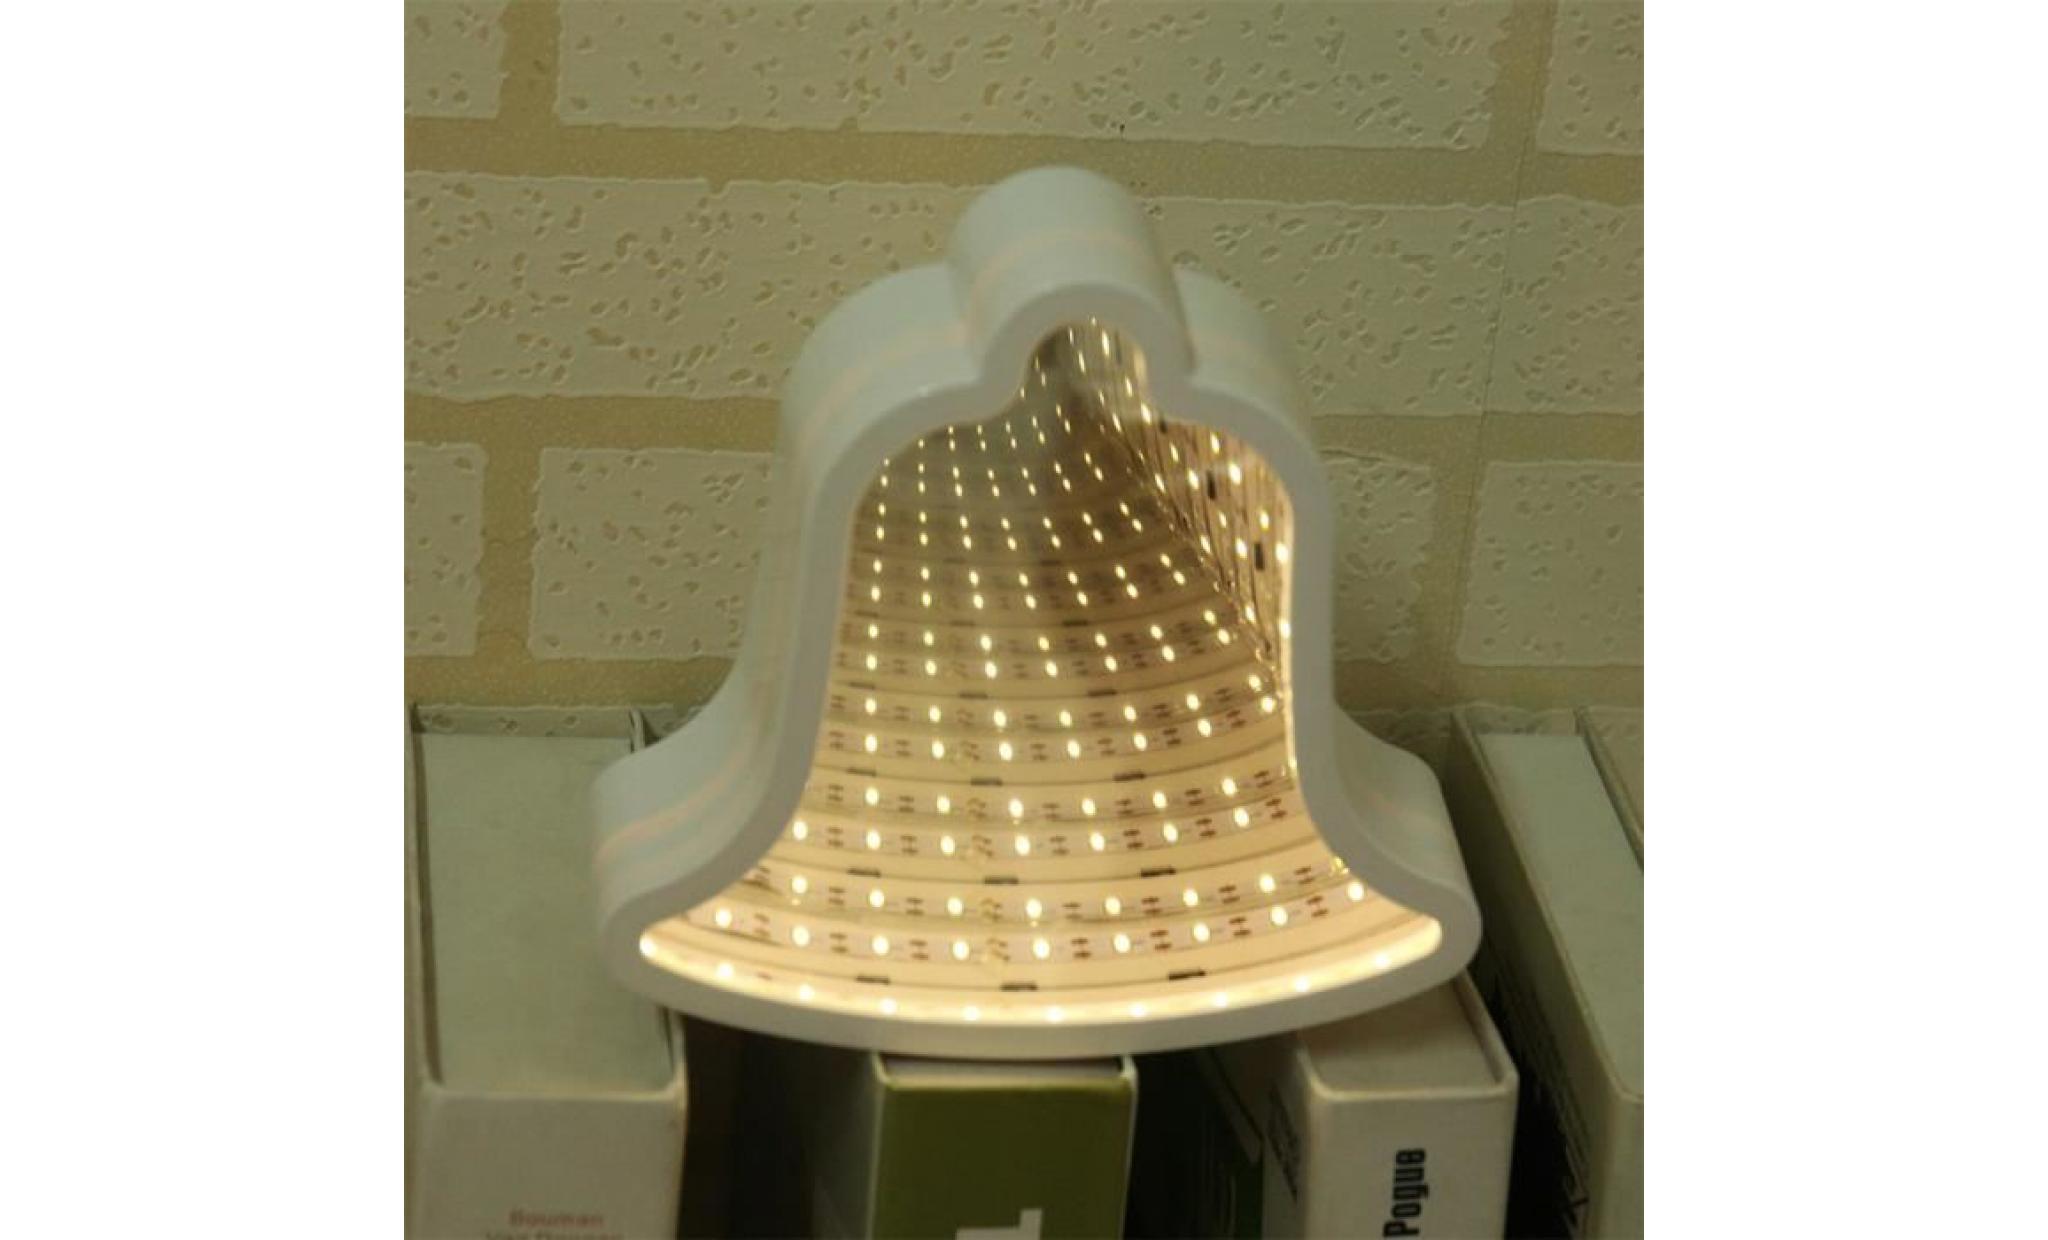 marquee led night light chambre tunnel modeling home décor batterie lampe mur sw2611 pas cher